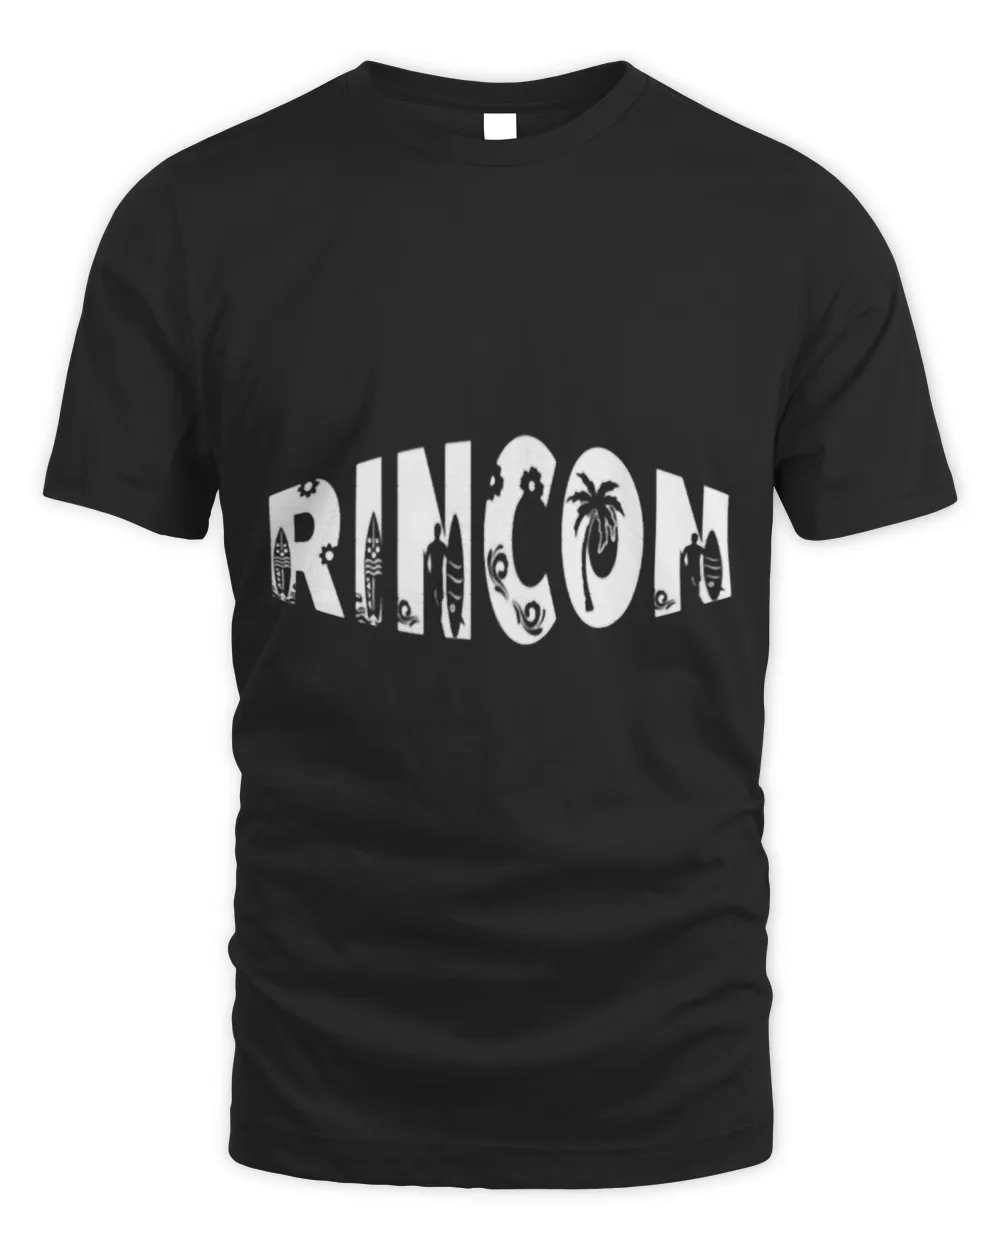 Rincon Beach Surfing Cool Surf Spot Tee For Surfers